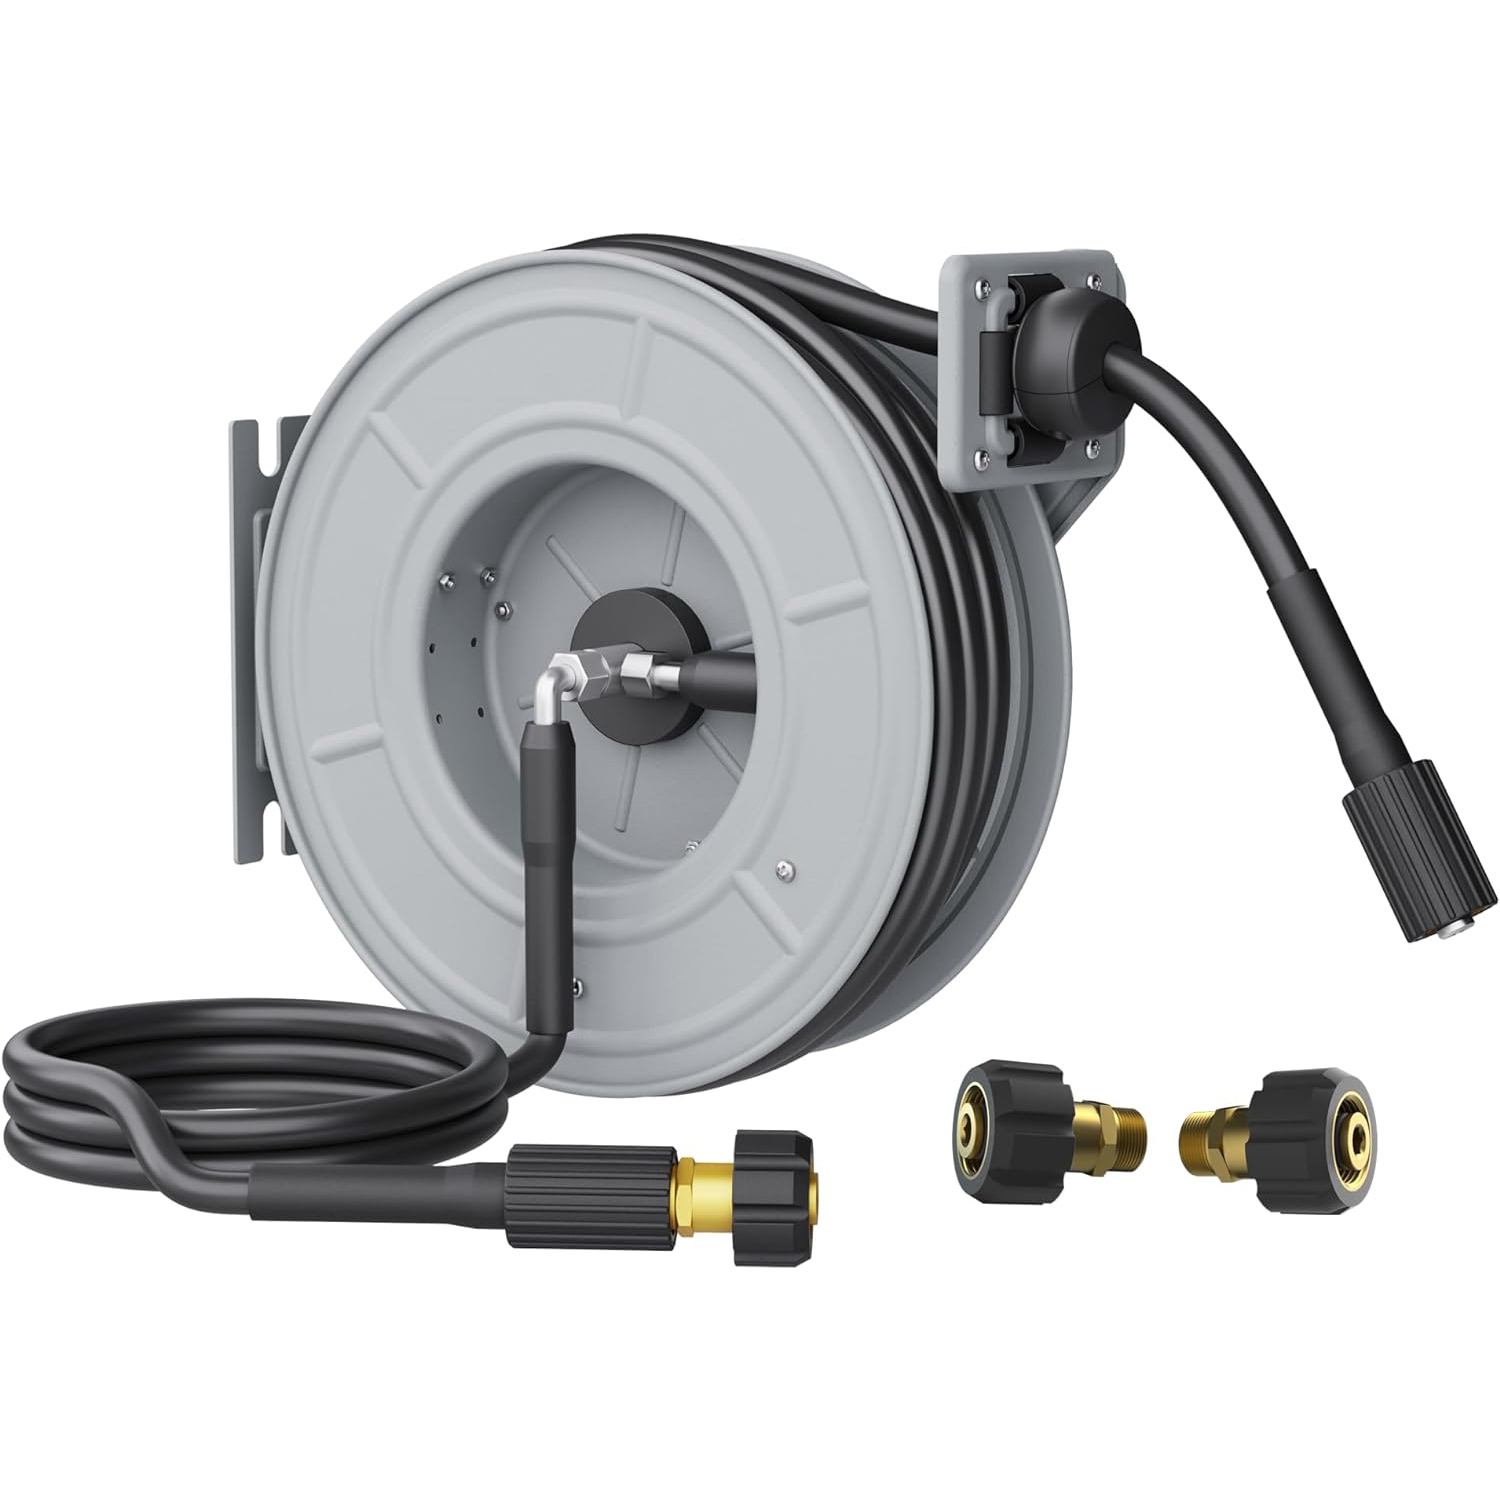 

Giraffe Tools Pressure Washer Hose Reel, 1/4" X 65 Ft Retractable Pressure Washer Reel, Steel Power Reel, Wall/ceiling/floor Mounted, 2 M22-15mm Connectors, Heavy Duty